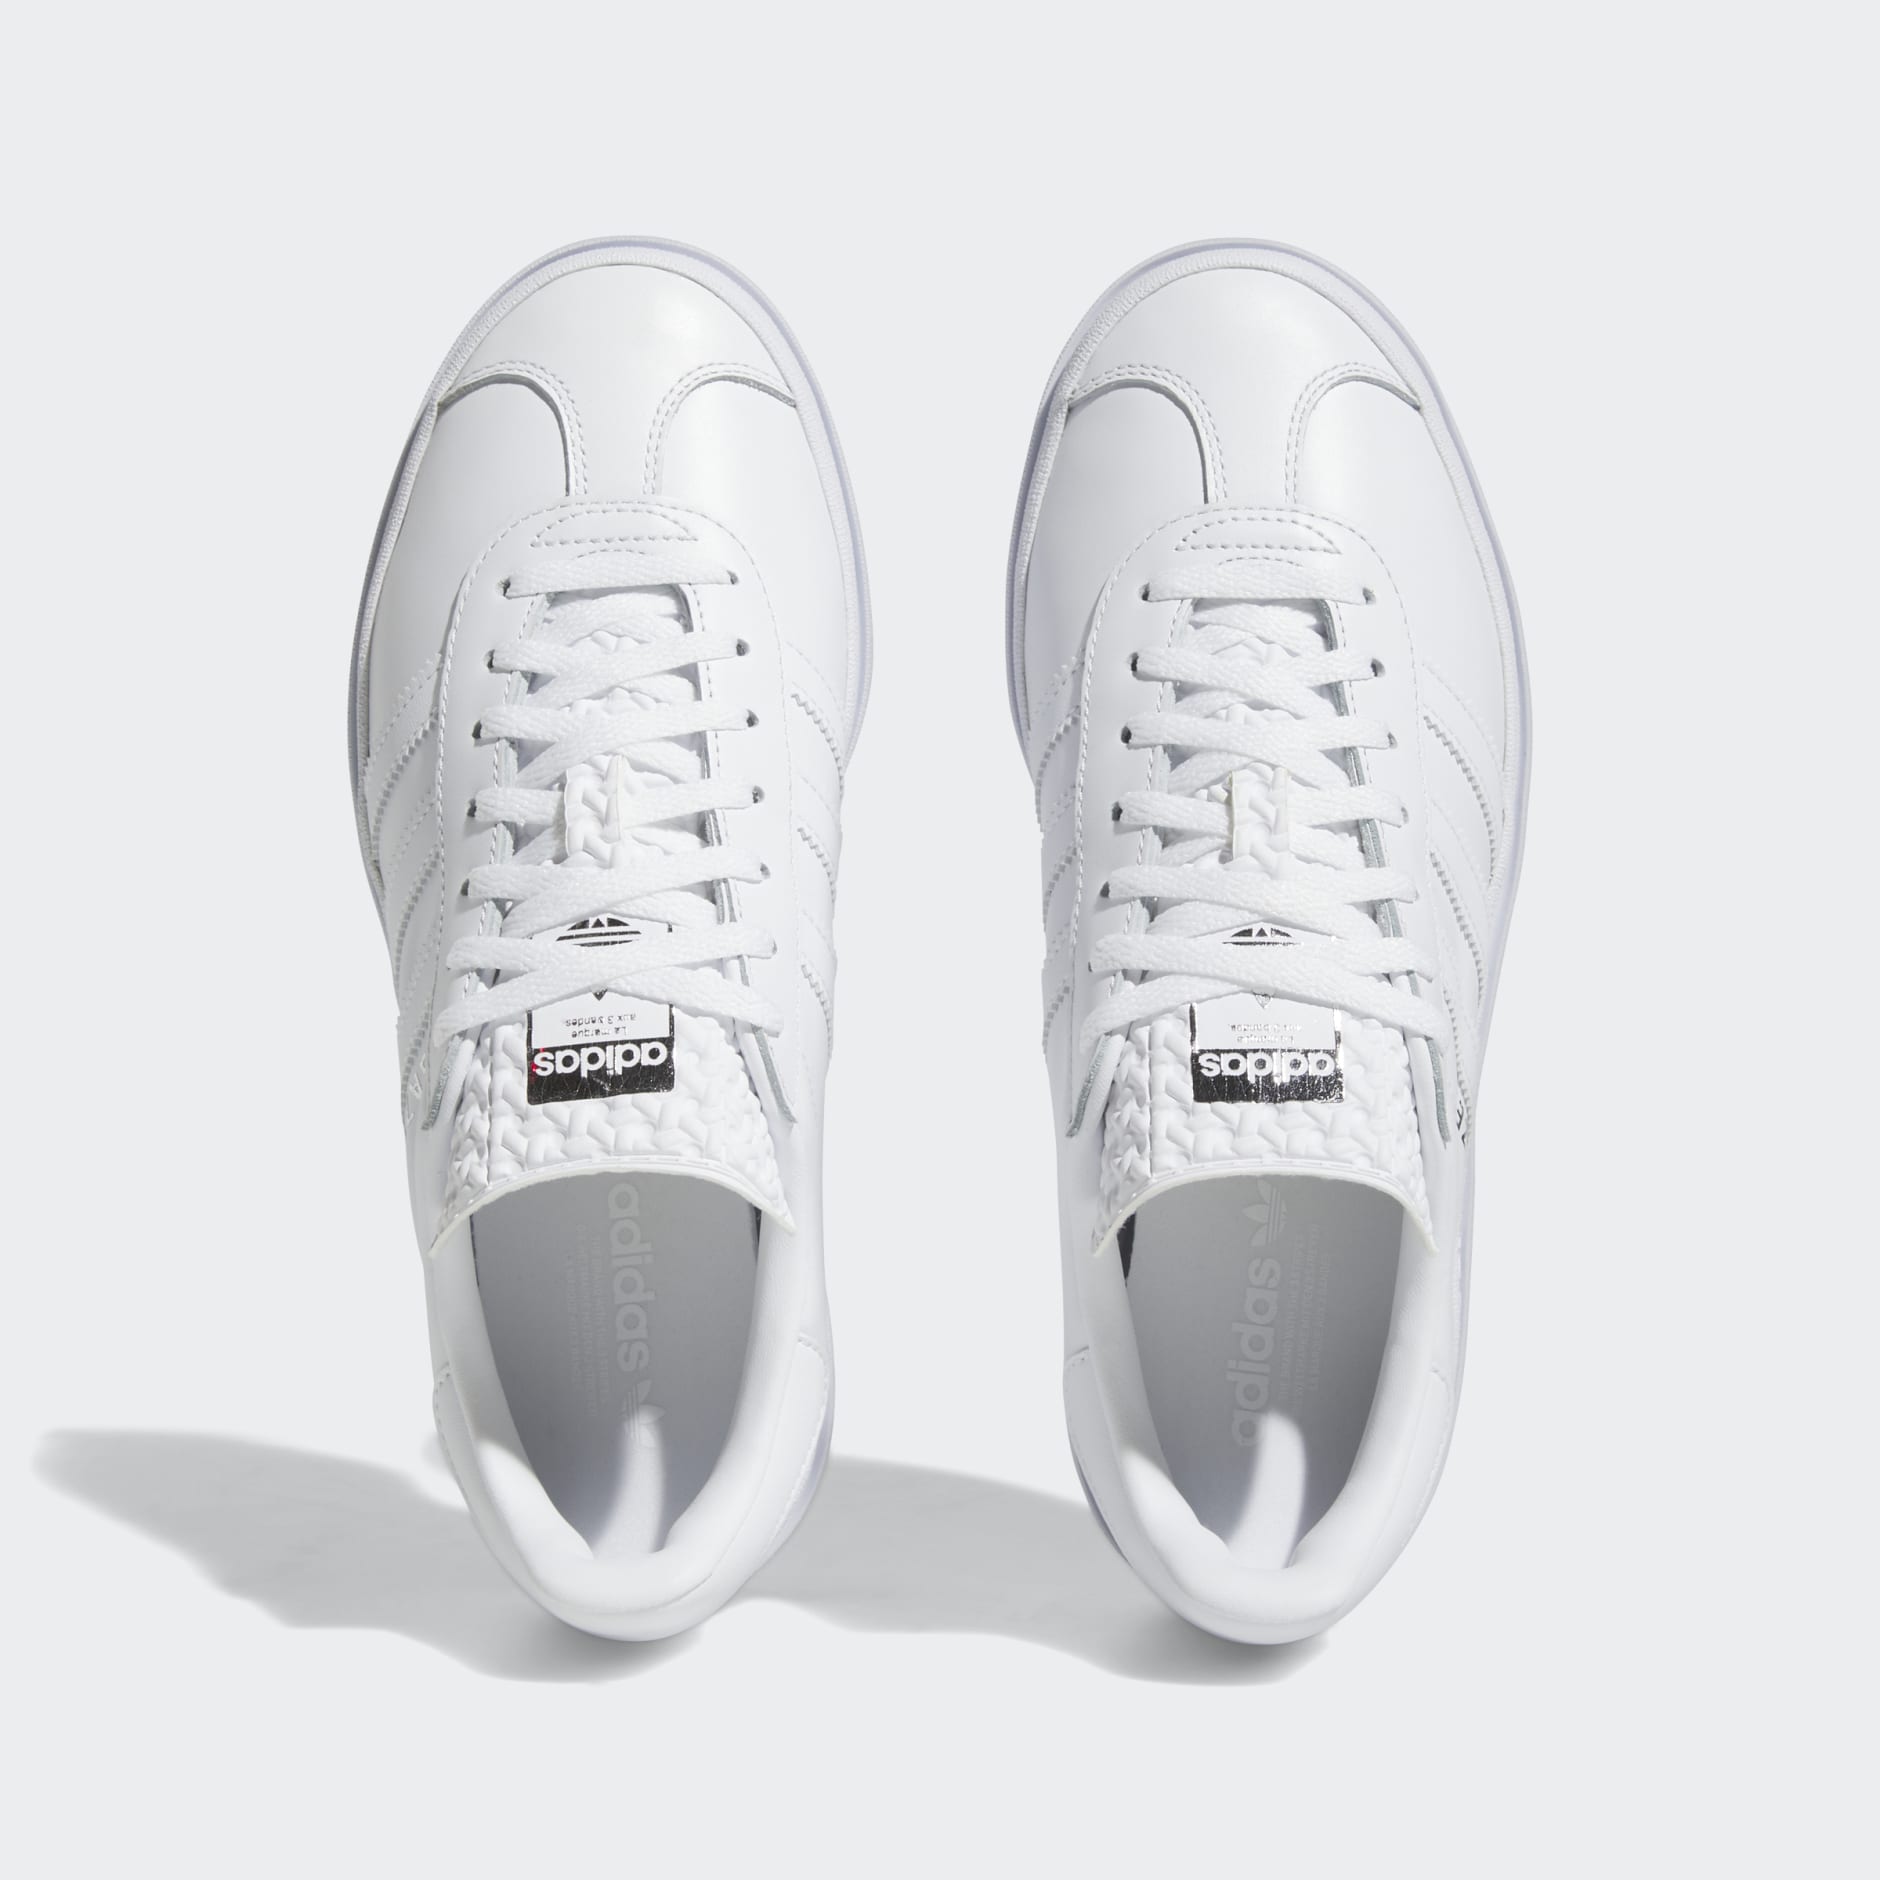 Shoes - Gazelle Bold Shoes - White | adidas South Africa